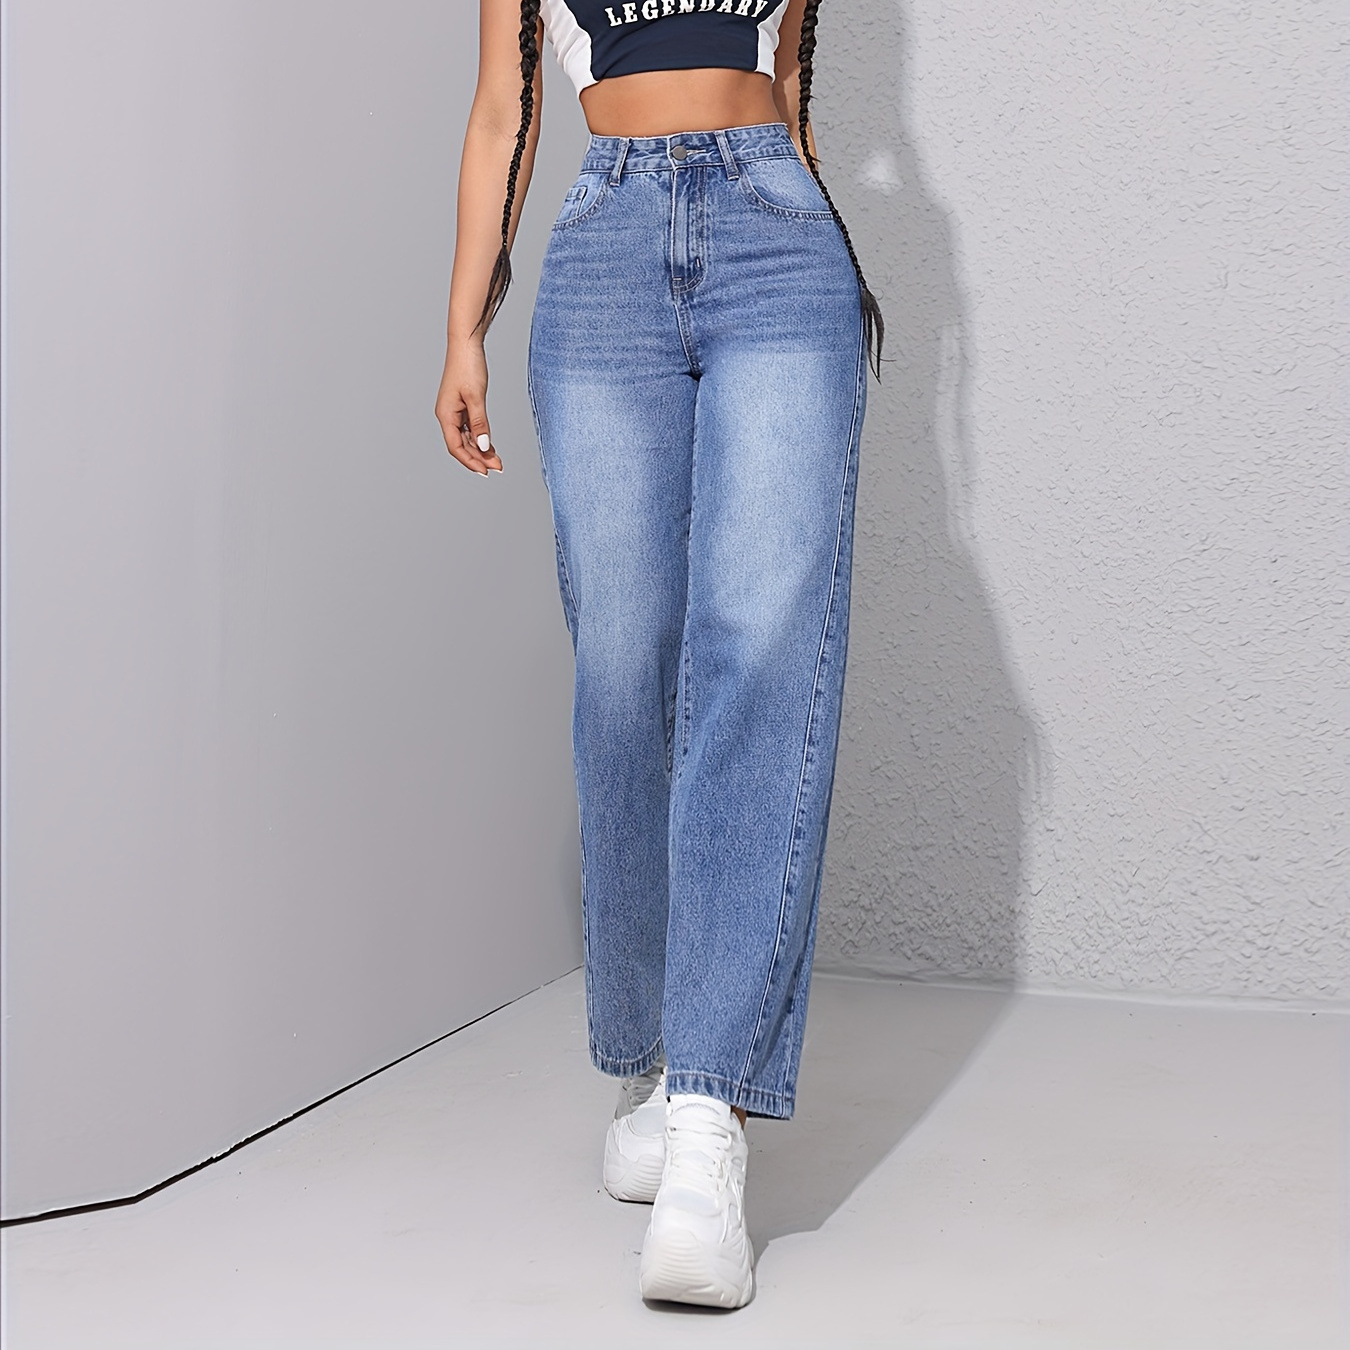 Dropship Blue Jeans Women Pants Vintage Wide Leg Straight High Waist Pants  For Women Pockets 2021 Autumn Denim Thin Slim Female Trousers to Sell  Online at a Lower Price